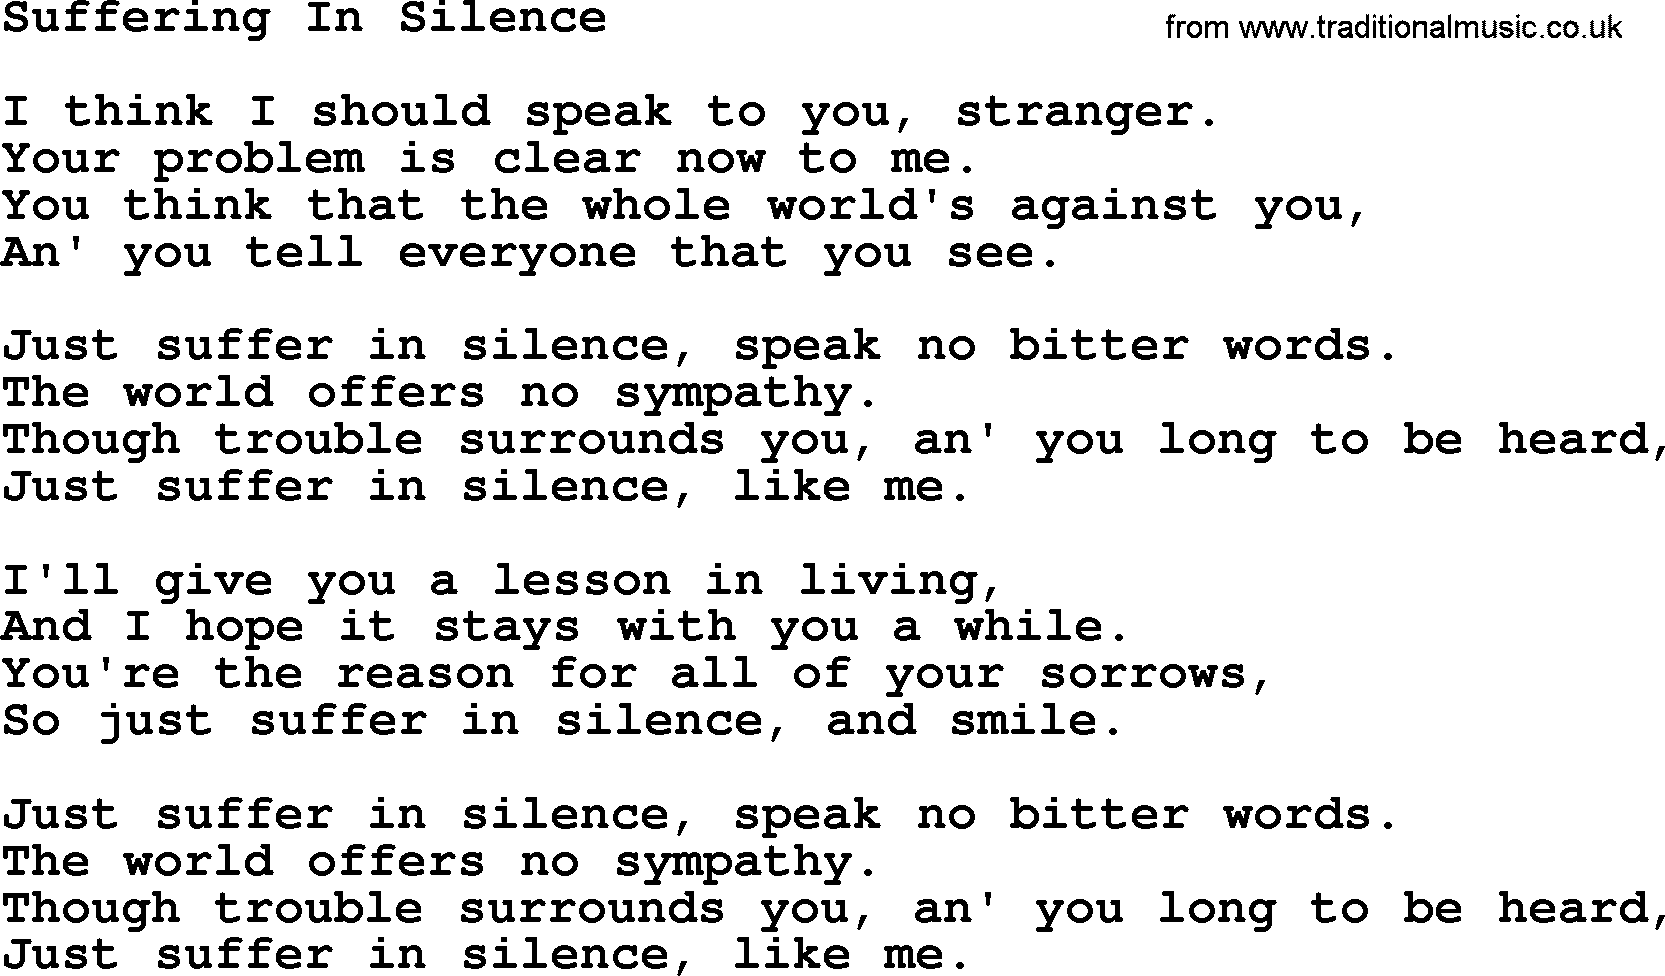 Willie Nelson song: Suffering In Silence lyrics